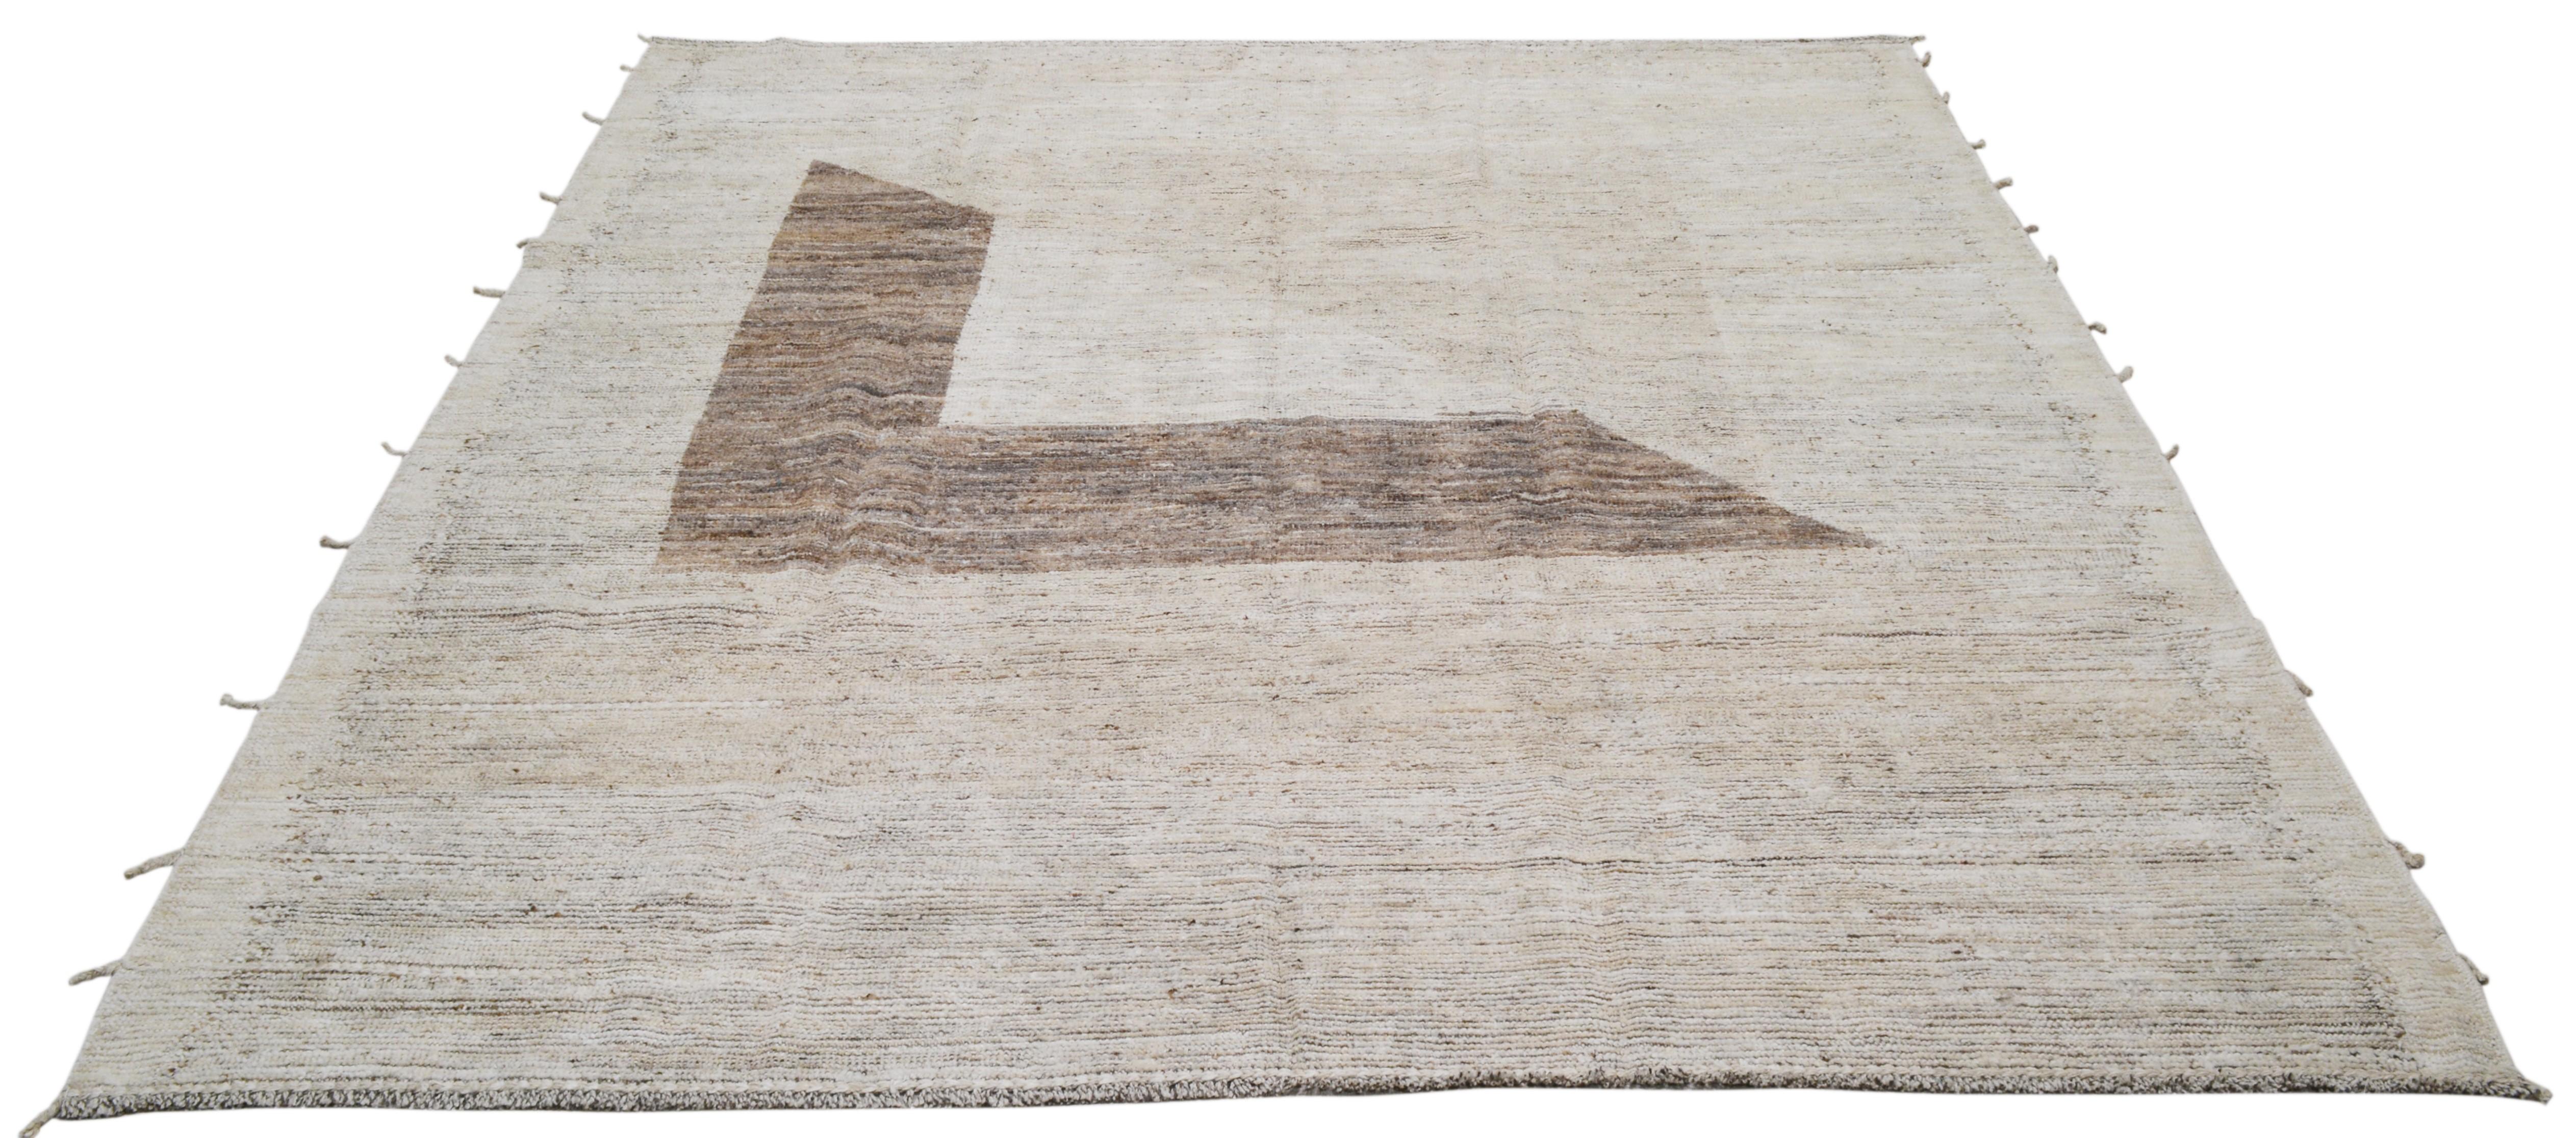 100% wool hand knotted / hand made Moroccan rug
Color: Sand, beige, brown, chocolate
Size: 8’5” x 9’6
Natural earthy colors look great with all styles, and will compliment any room.

